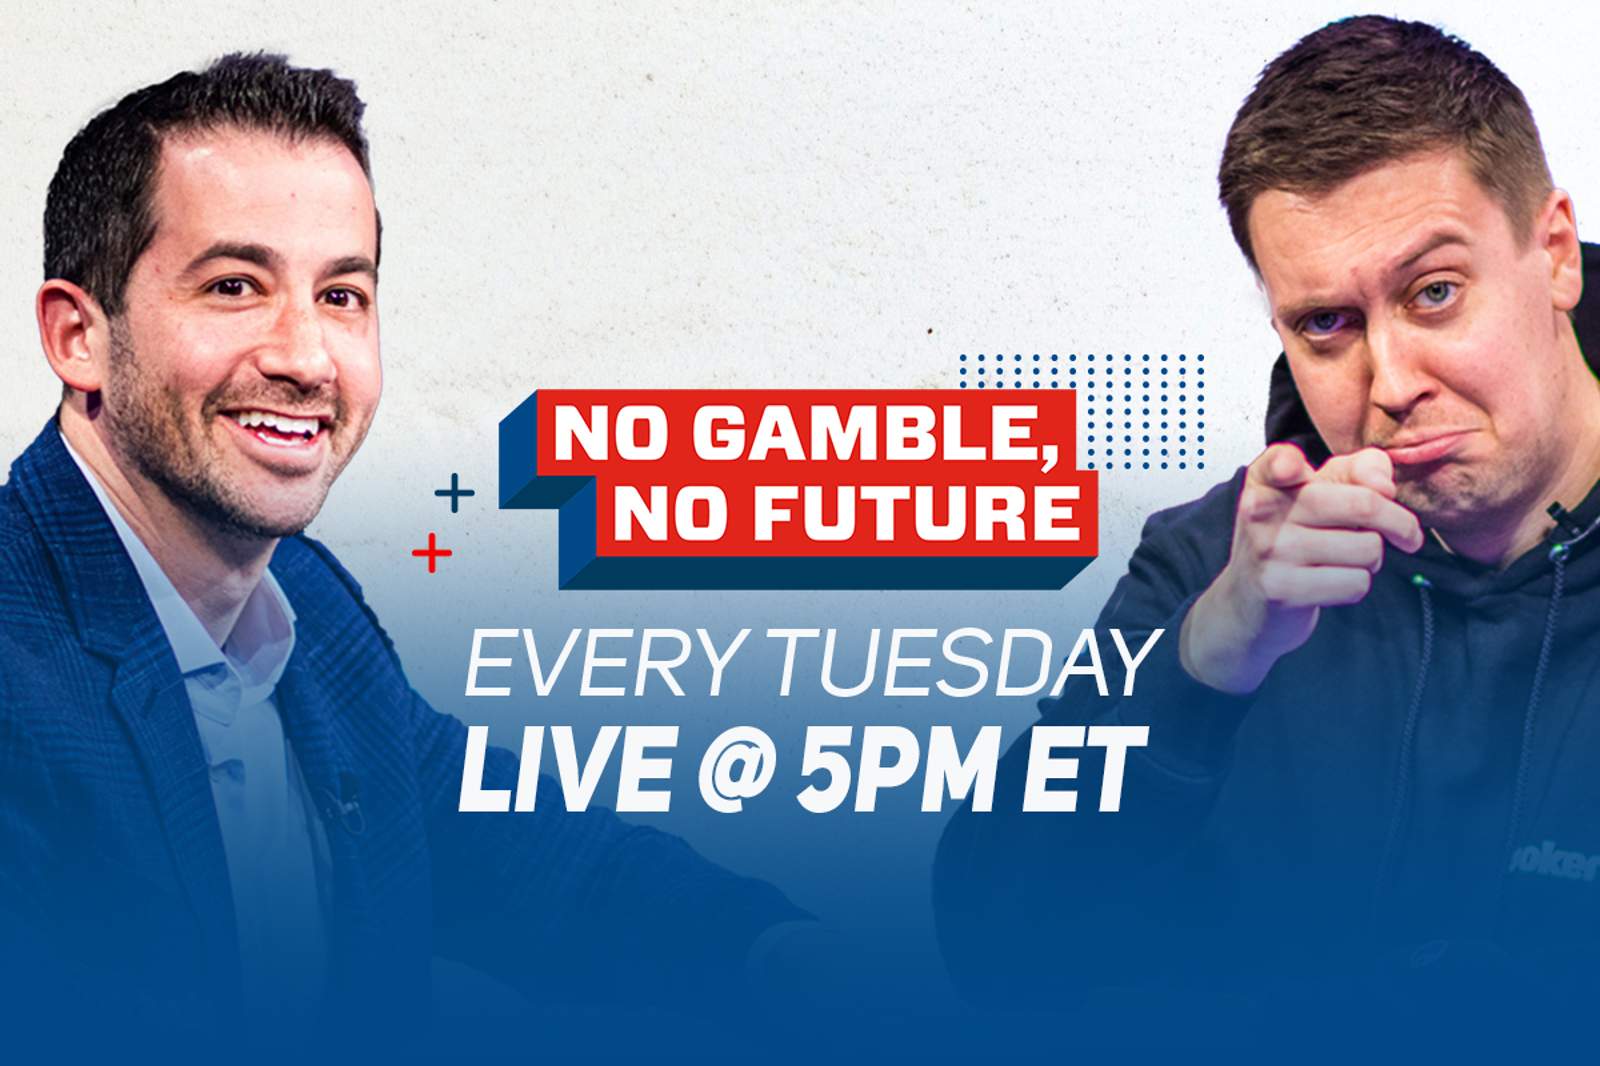 No Gamble, No Future Episode 16 on Today at 5 p.m. ET with Tom Dwan